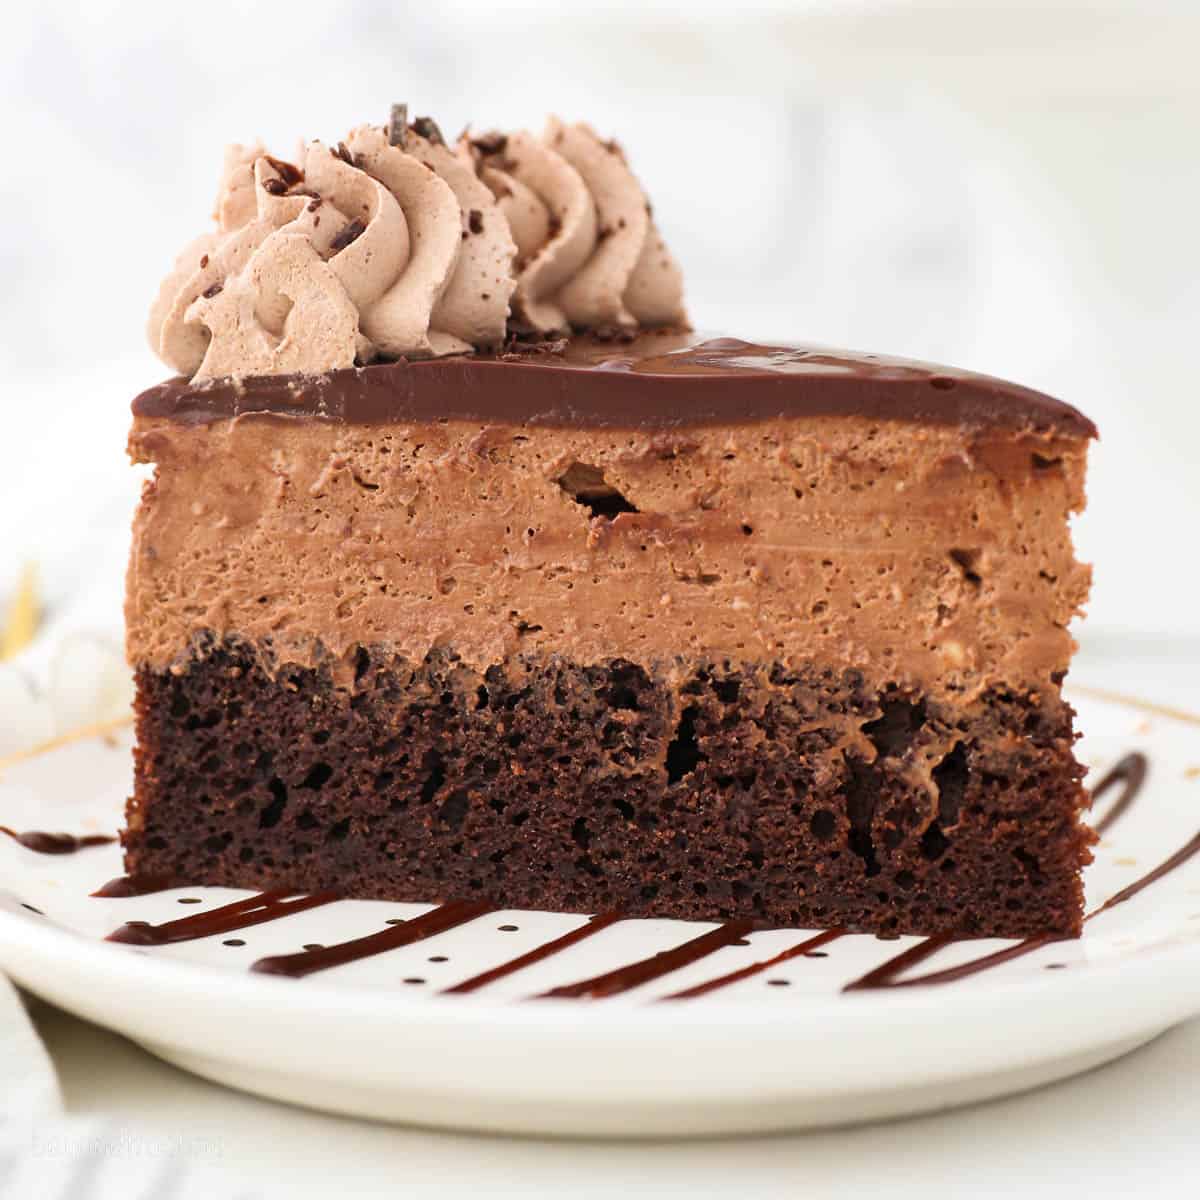 How To Make A Chocolate Mousse Cake - Inthemidnightkitchen